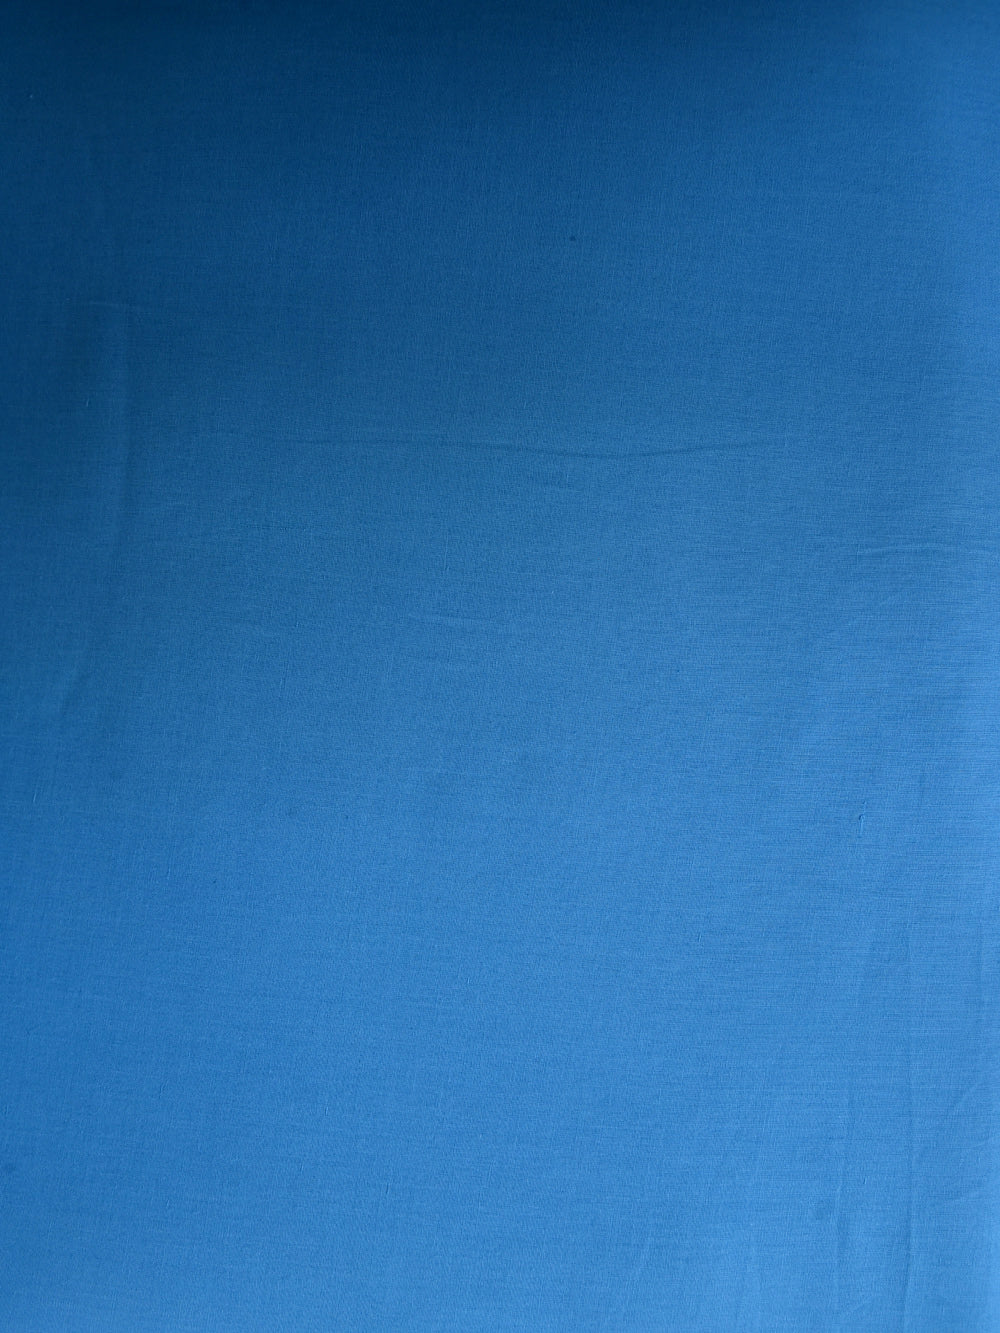 C-19 Blue Shade Solid Dyed Cotton Cambric Fabric